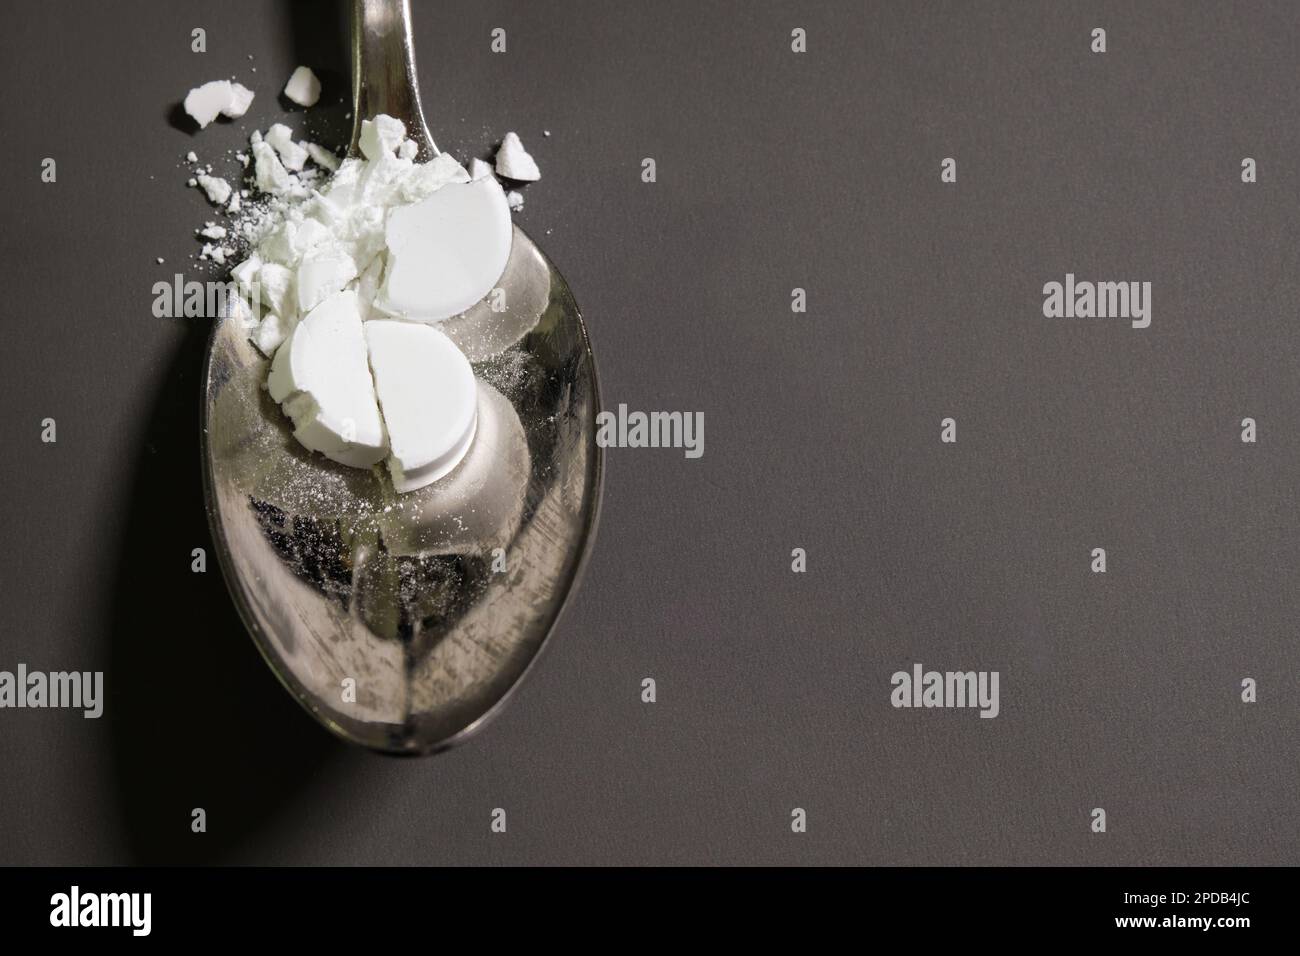 Pharmaceutical medicine drugs powder on a silver metal spoon. Smashed remedy, tablets, on top of a grey table in the background. Stock Photo